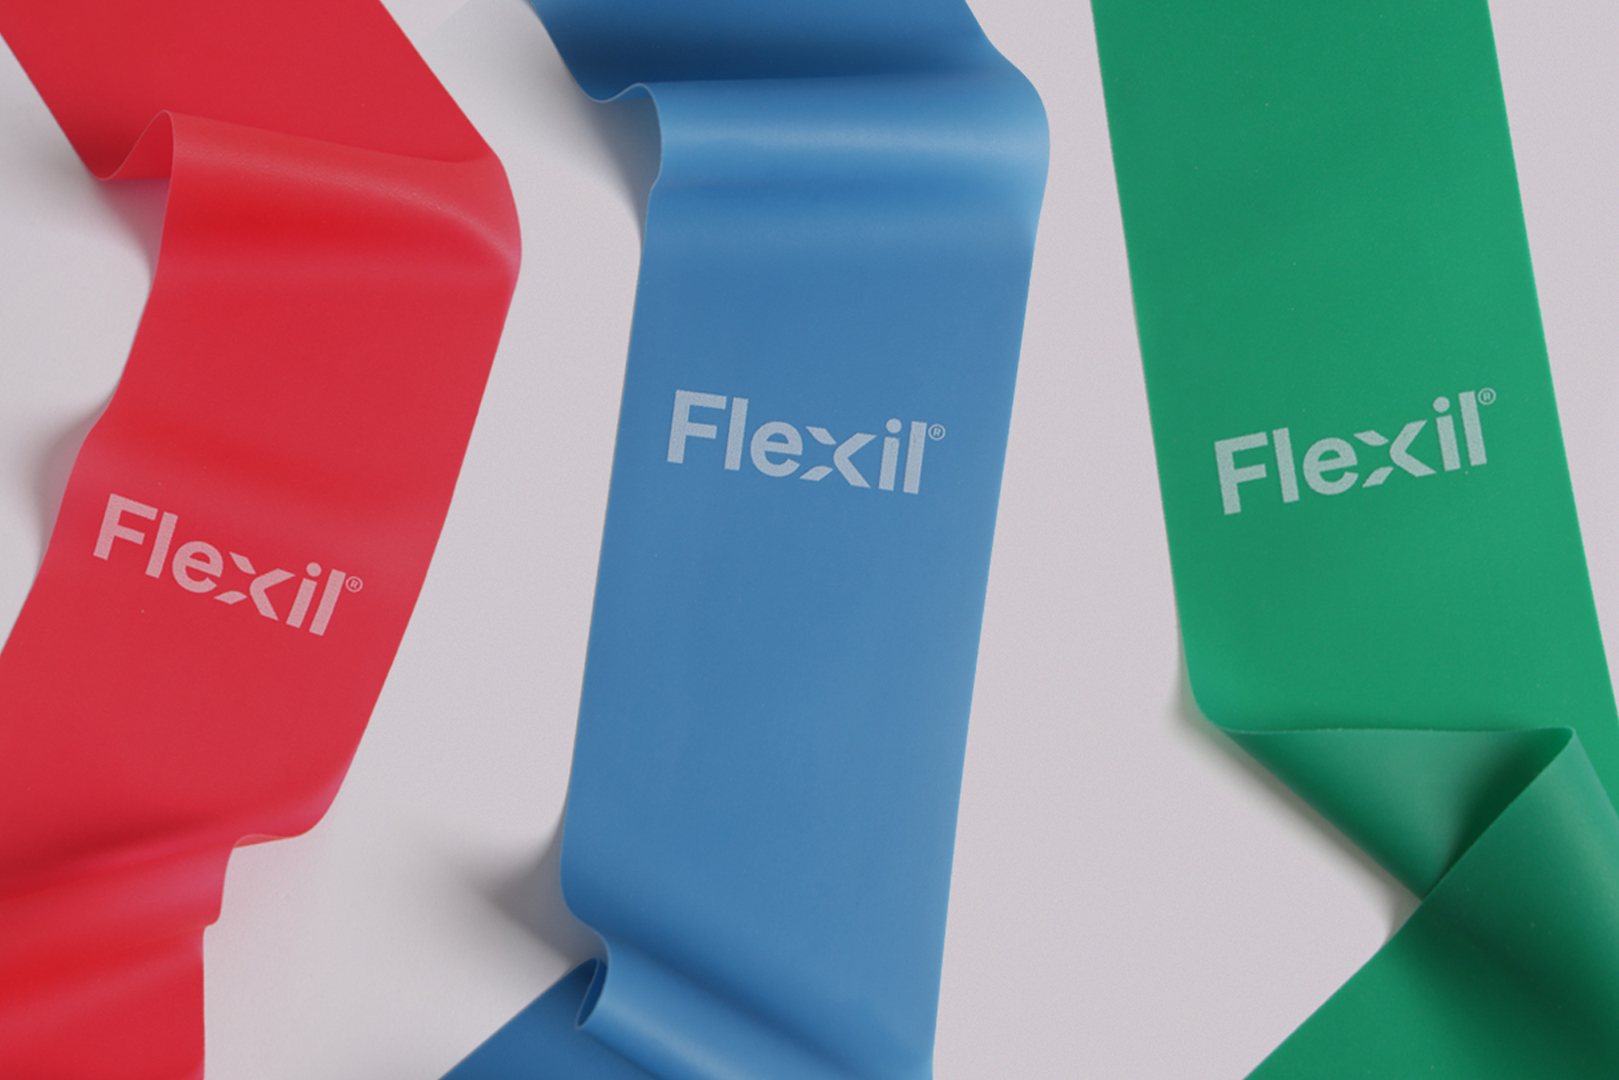 Flexil® Premium Resistance Exercise Band 45.5m - Latex: An Exciting Evolution in Our Product Range